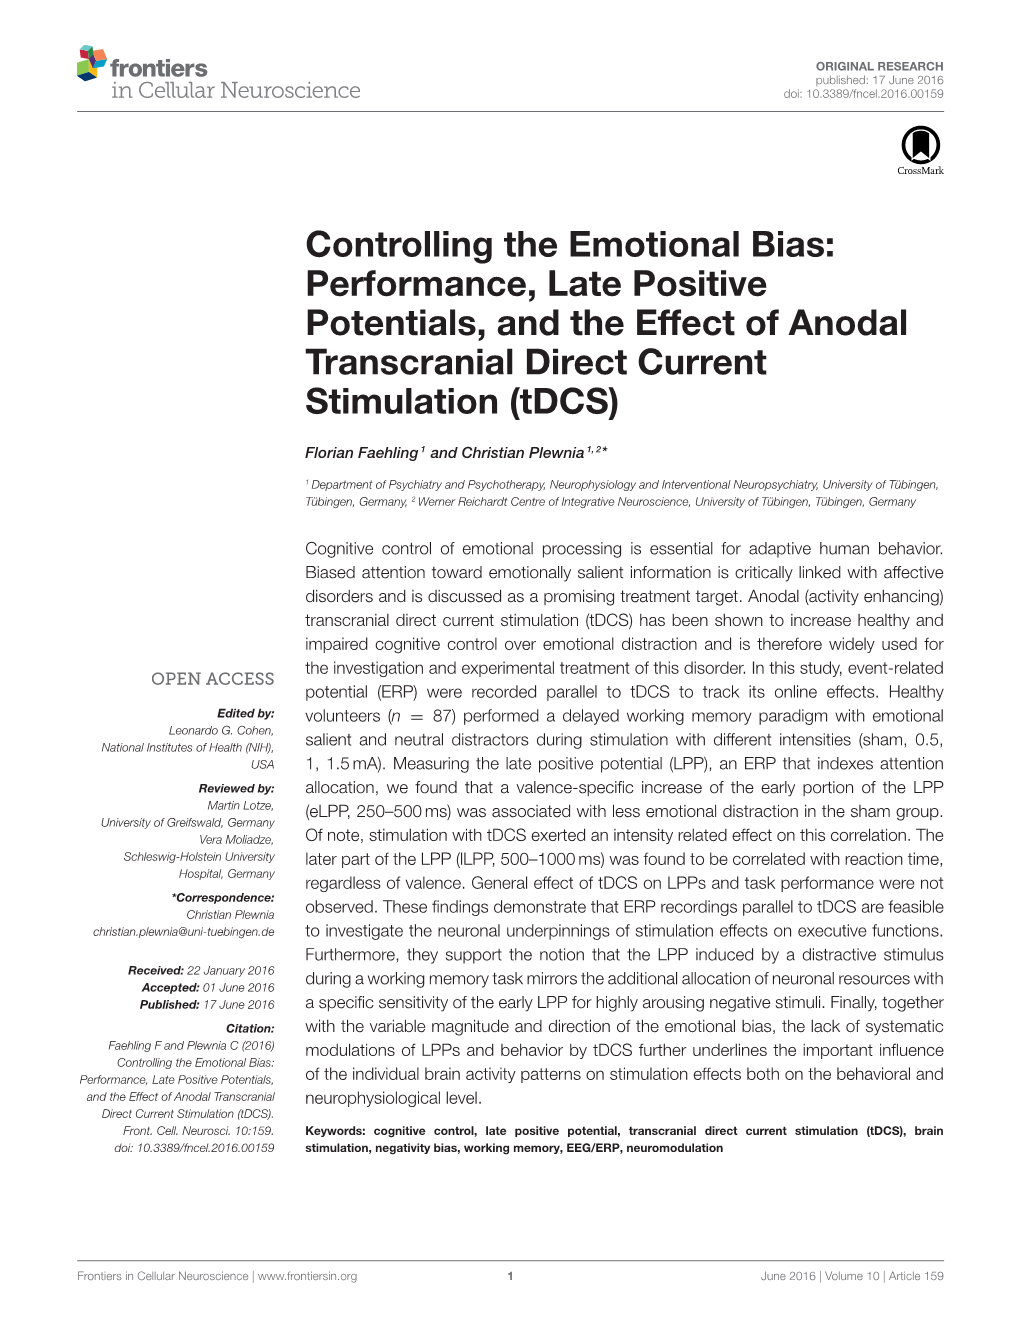 Controlling the Emotional Bias: Performance, Late Positive Potentials, and the Effect of Anodal Transcranial Direct Current Stimulation (Tdcs)